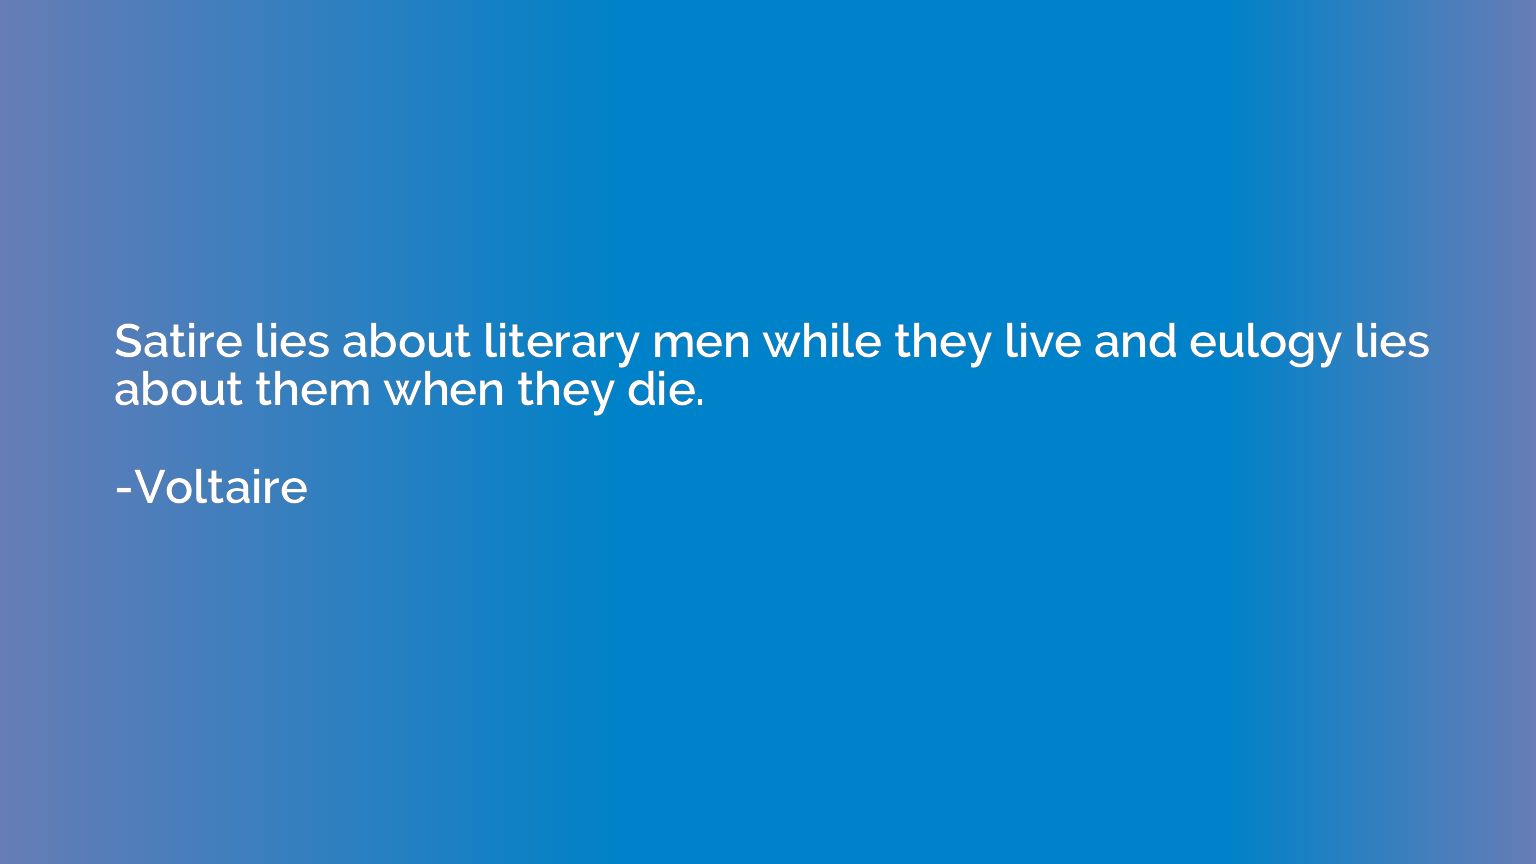 Satire lies about literary men while they live and eulogy li